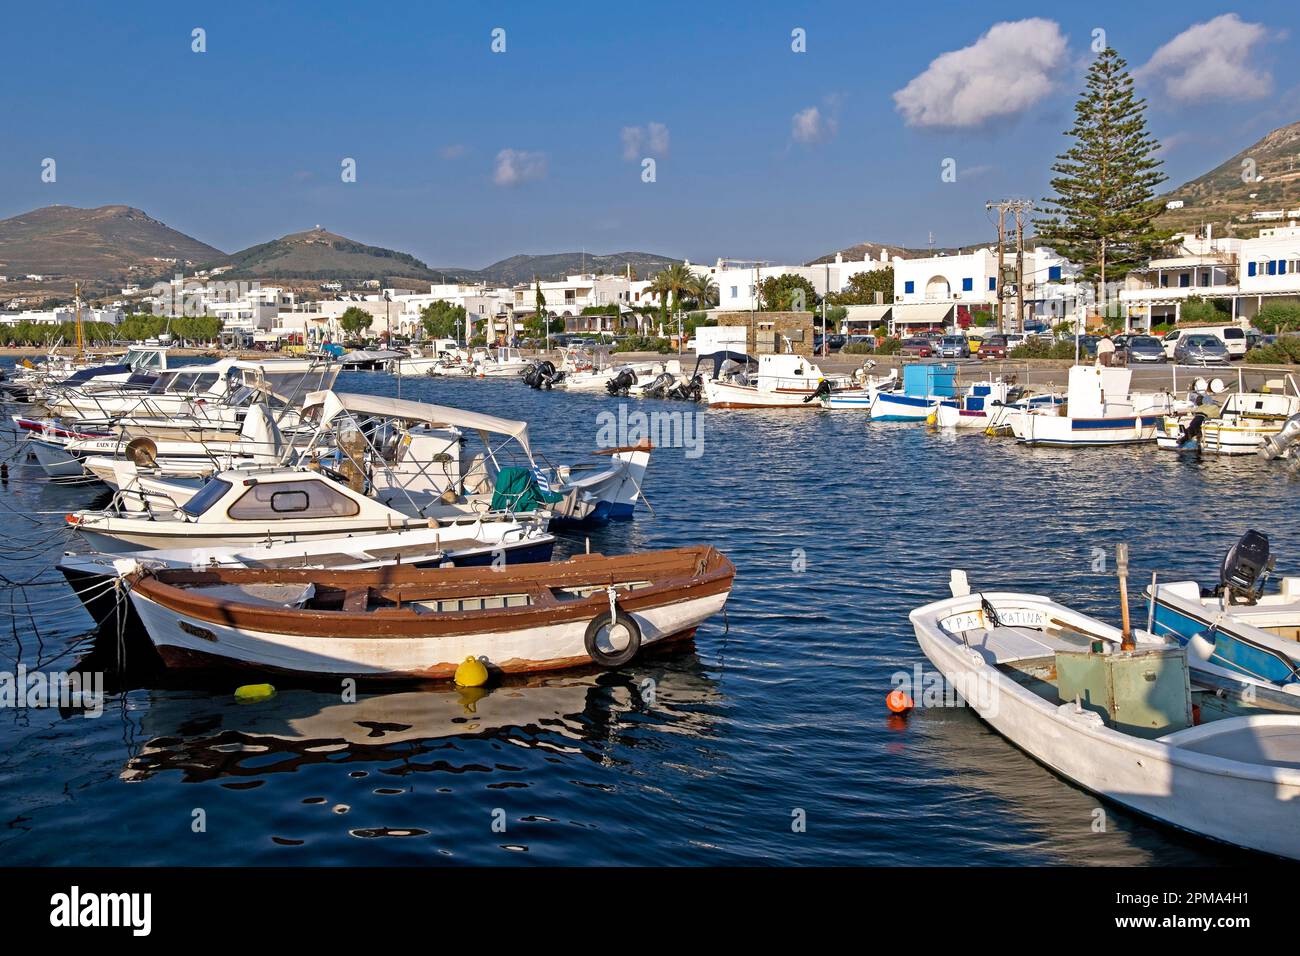 Boats in the harbour of Parikia, Paros, Cyclades, Cyclades island, Greece Stock Photo